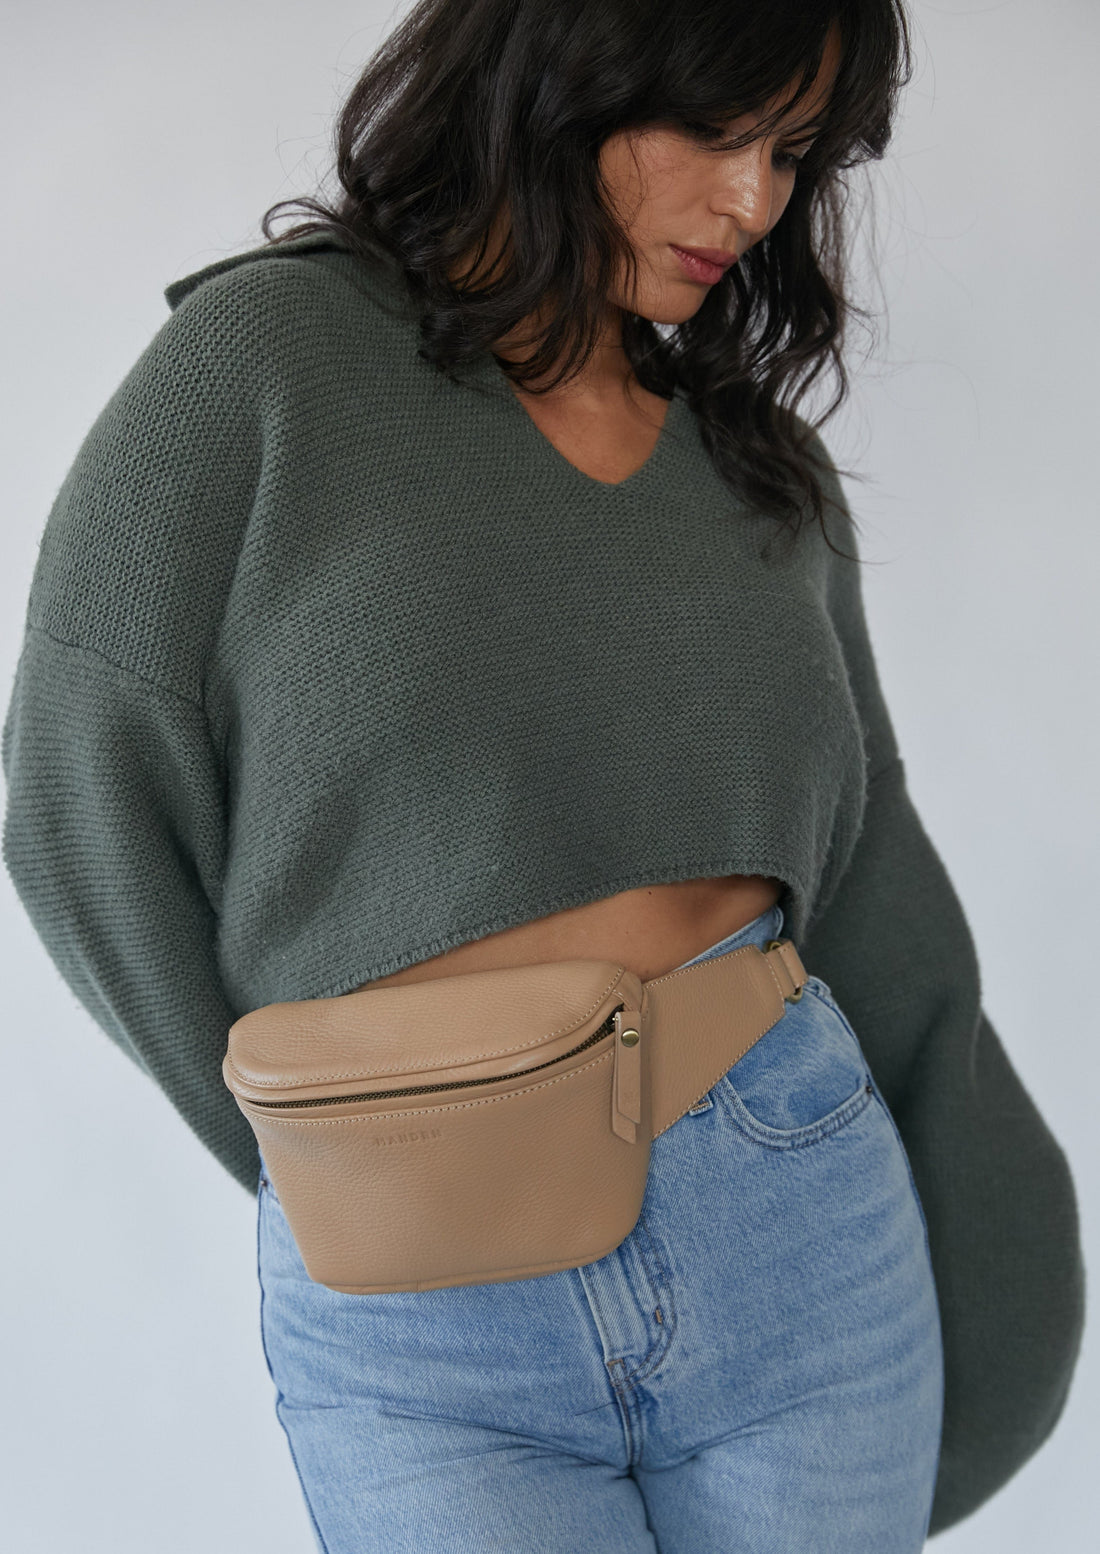 Robrasim Leather Waist Bags, Handmade Genuine Leather Fanny Pack for M